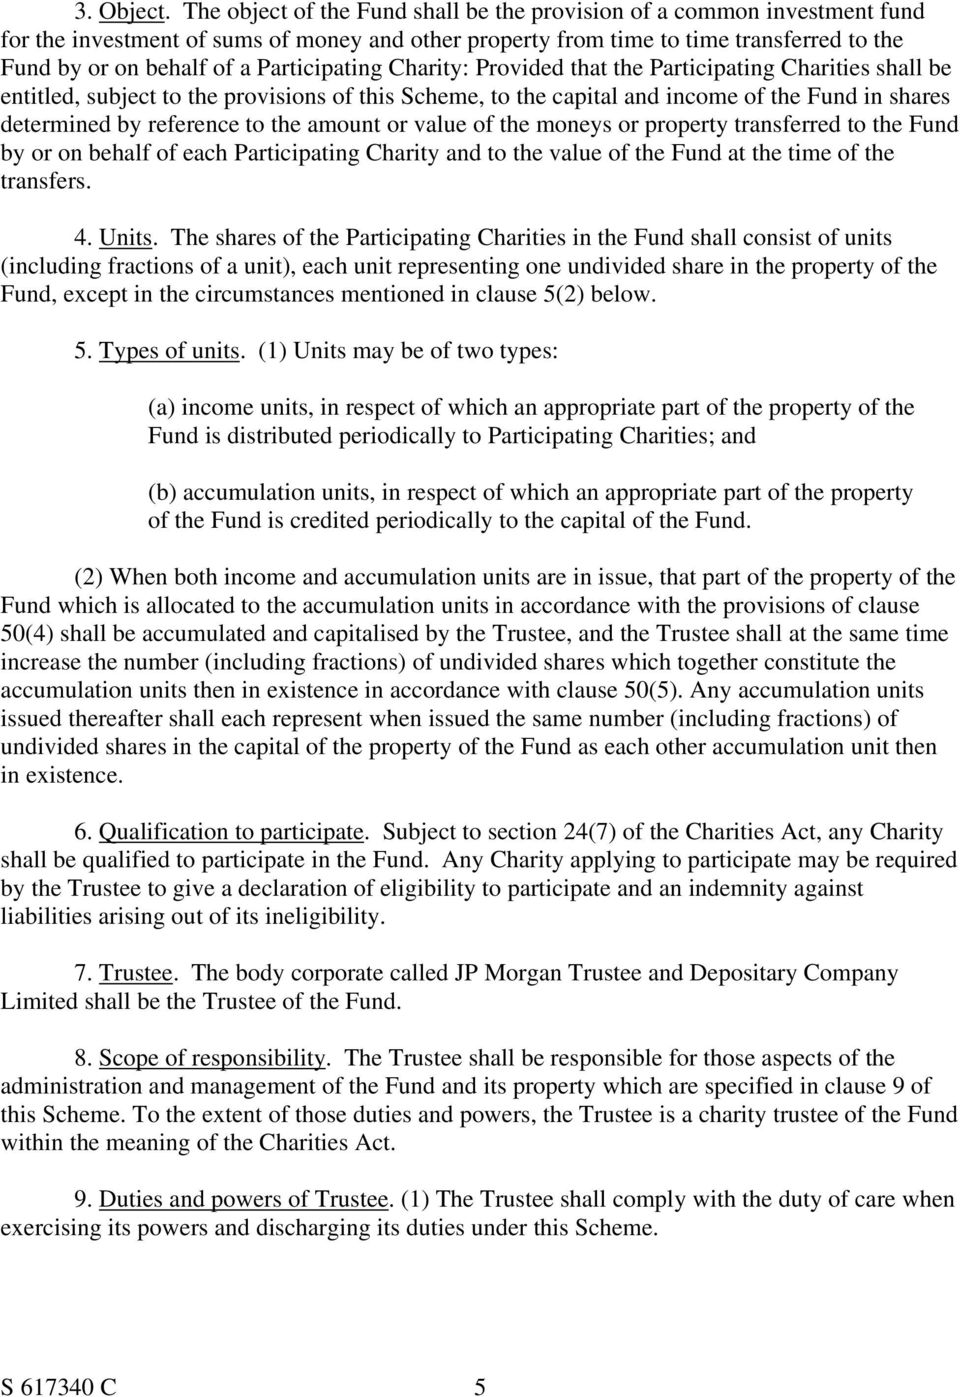 Participating Charity: Provided that the Participating Charities shall be entitled, subject to the provisions of this Scheme, to the capital and income of the Fund in shares determined by reference